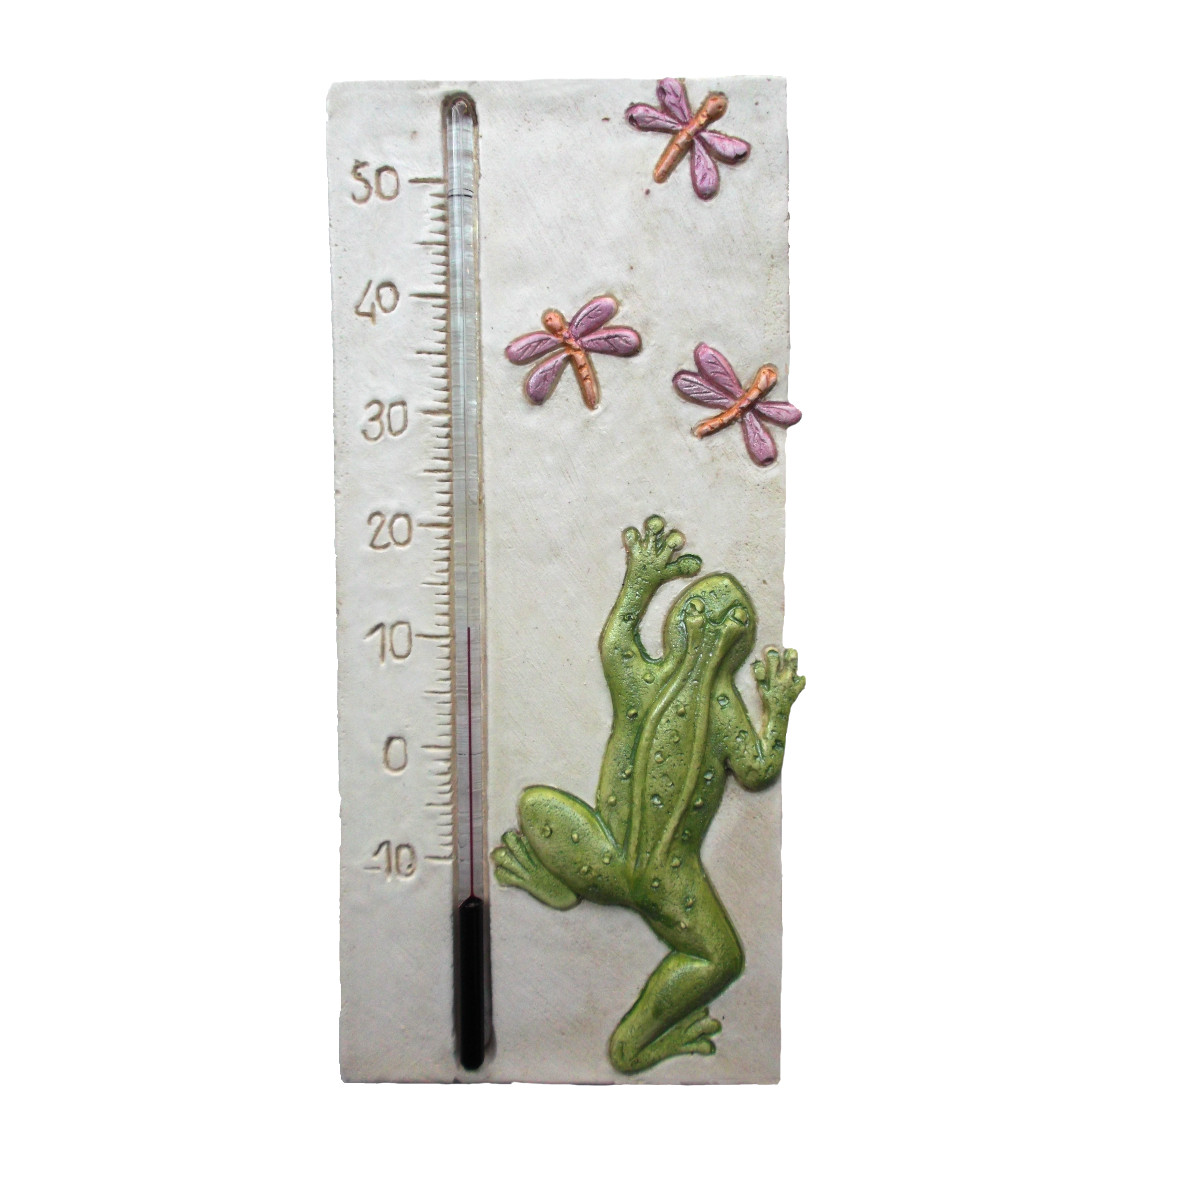 Thermomètre grenouille: objet déco artisanal made in France